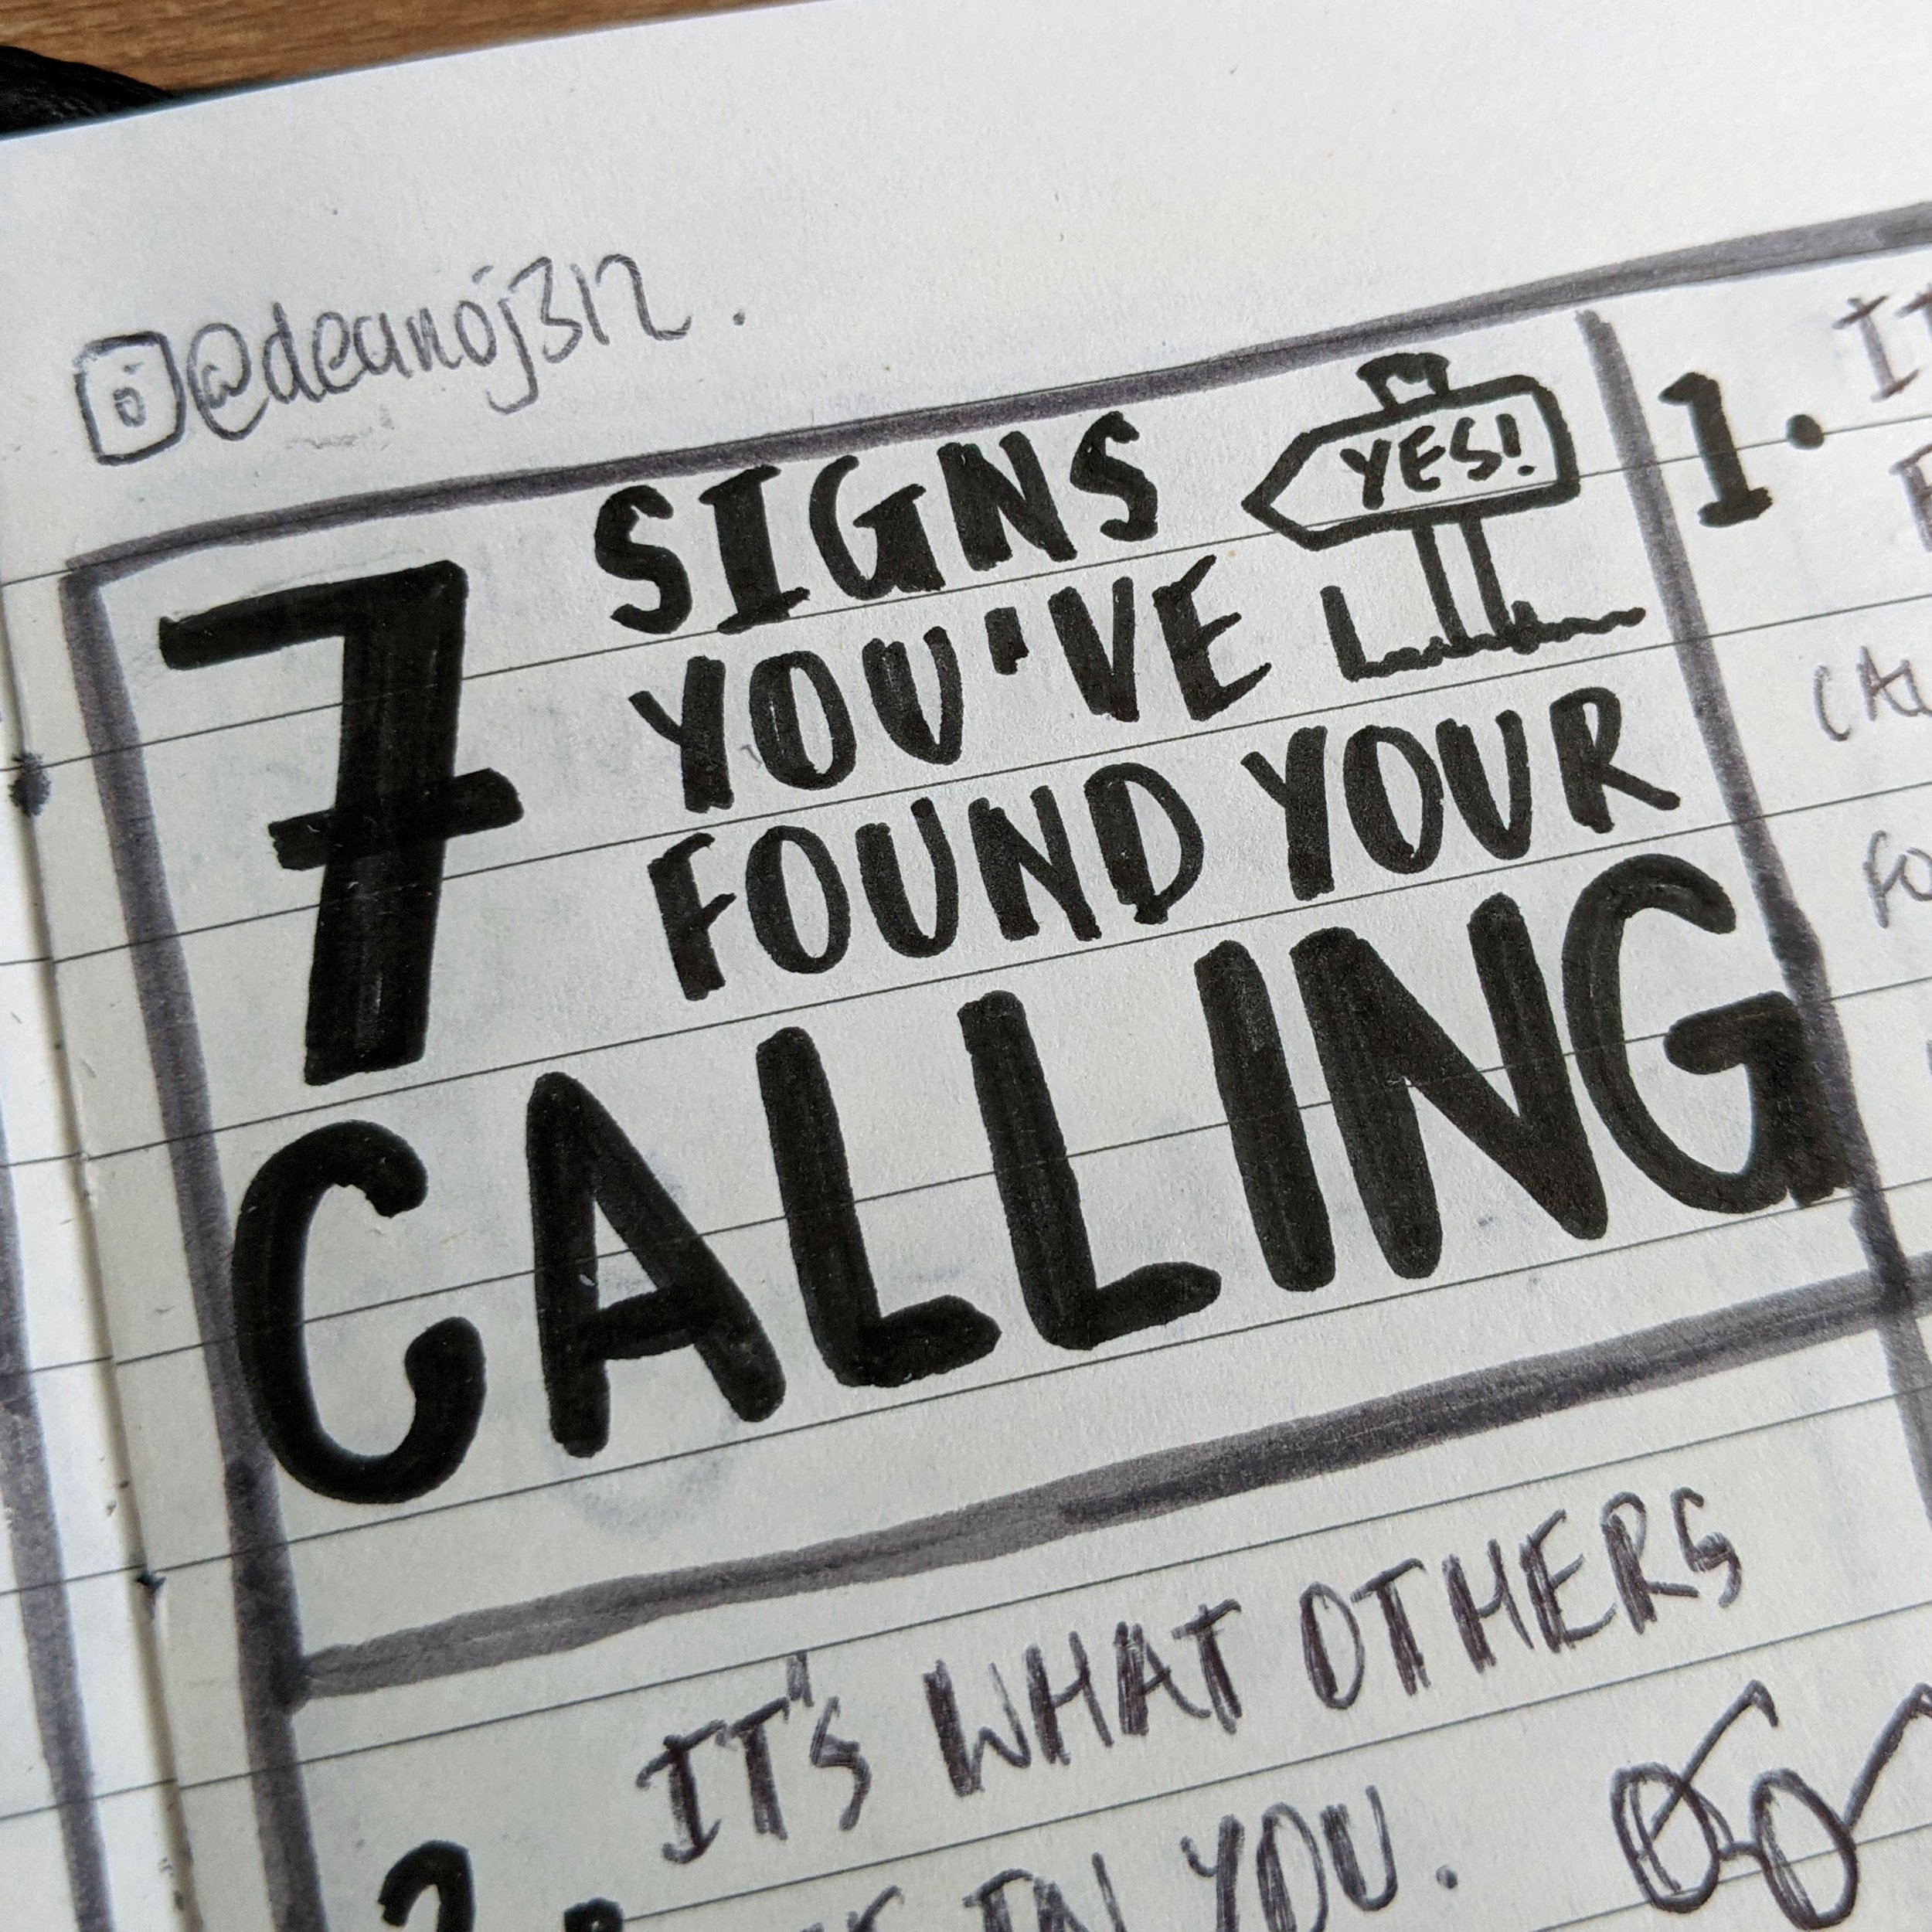 7SignsYouveFoundYourCalling2.jpg